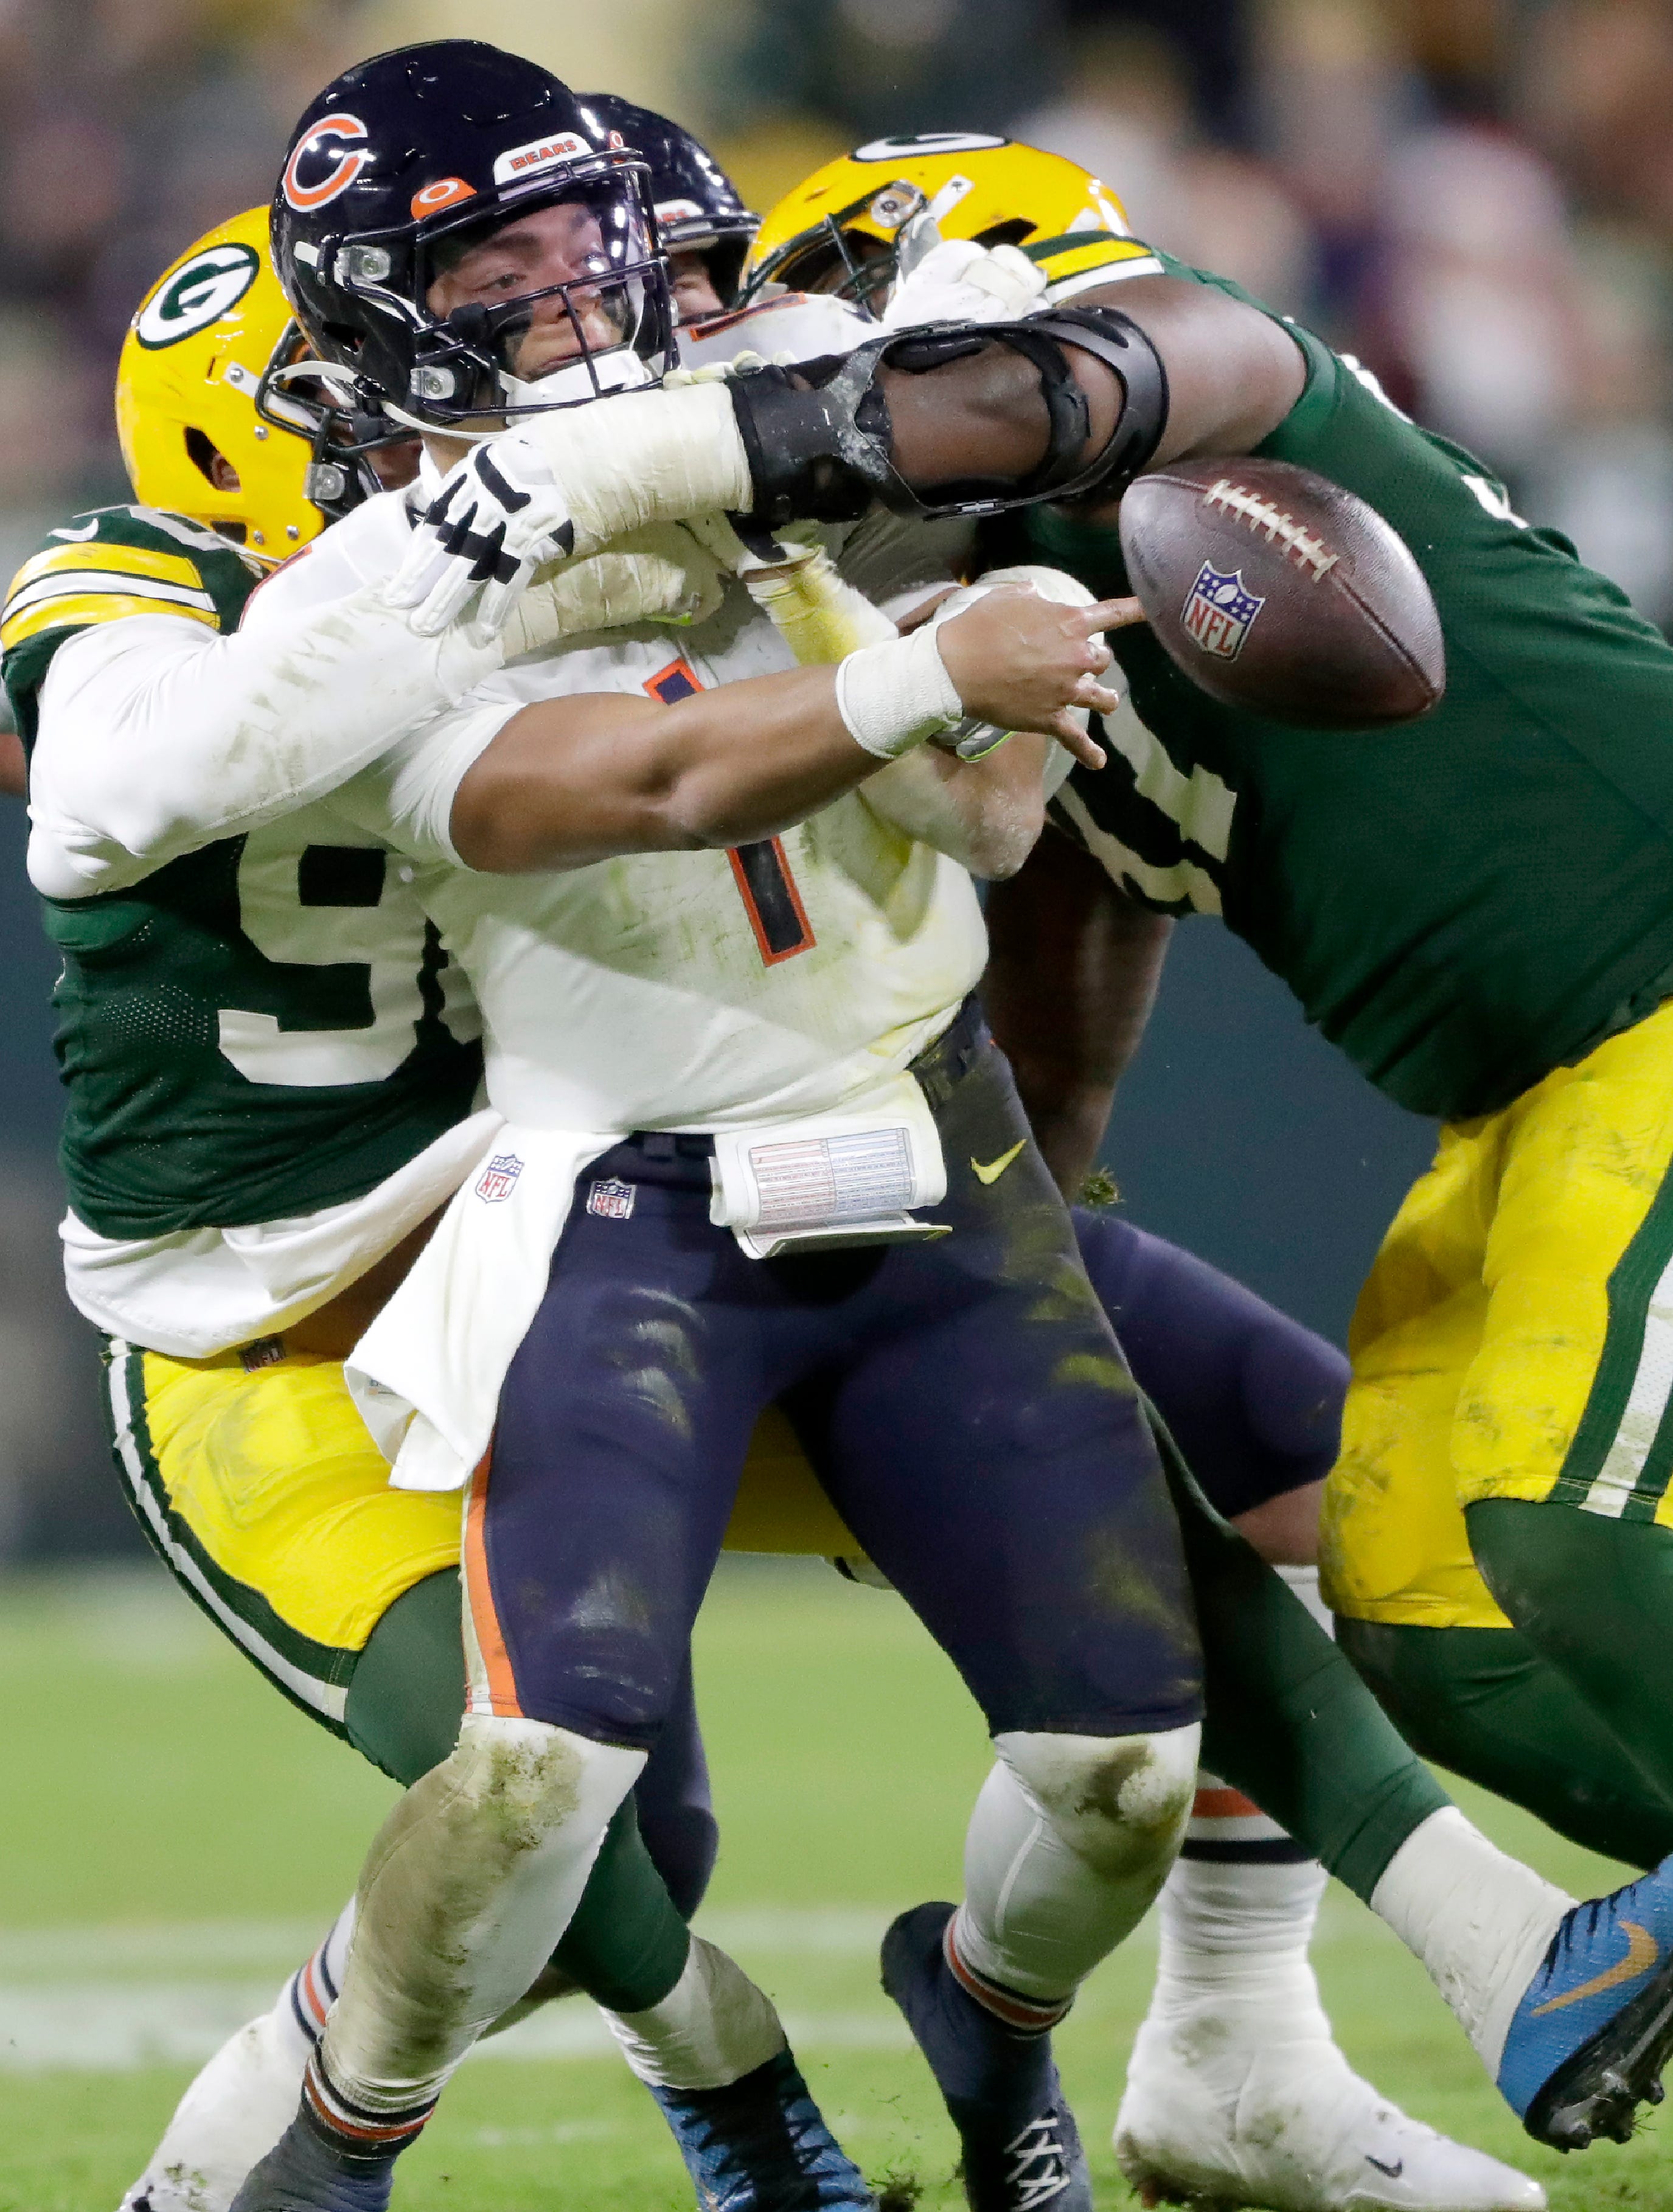 Chicago Bears quarterback Justin Fields (1) is sacked by Green Bay Packers defensive end Kingsley Keke (96) and nose tackle Kenny Clark (97) on Sunday, Dec. 12, 2021, at Lambeau Field in Green Bay, Wis.